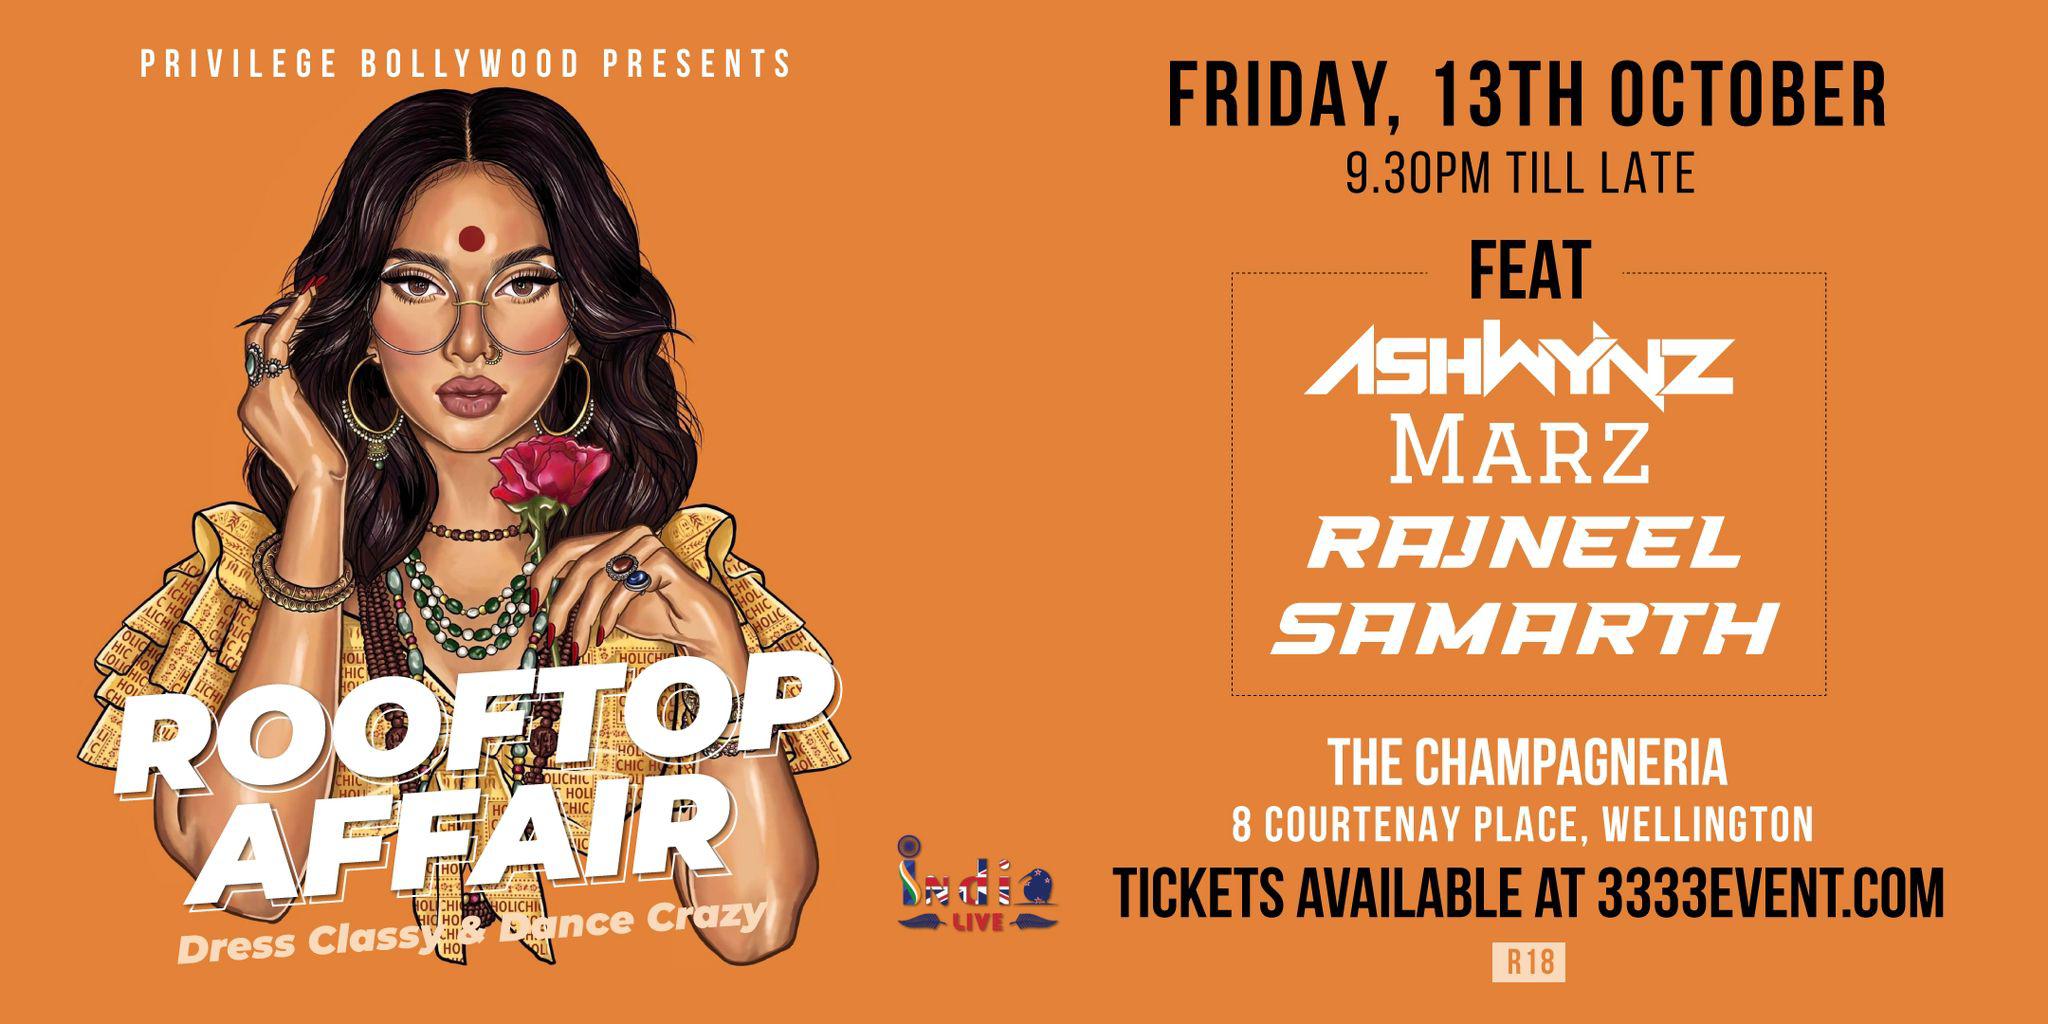 🎉 Privilege Bollywood: ROOFTOP AFFAIR on 13 OCT from 9:30PM @ The Champagneria, WLG🎉